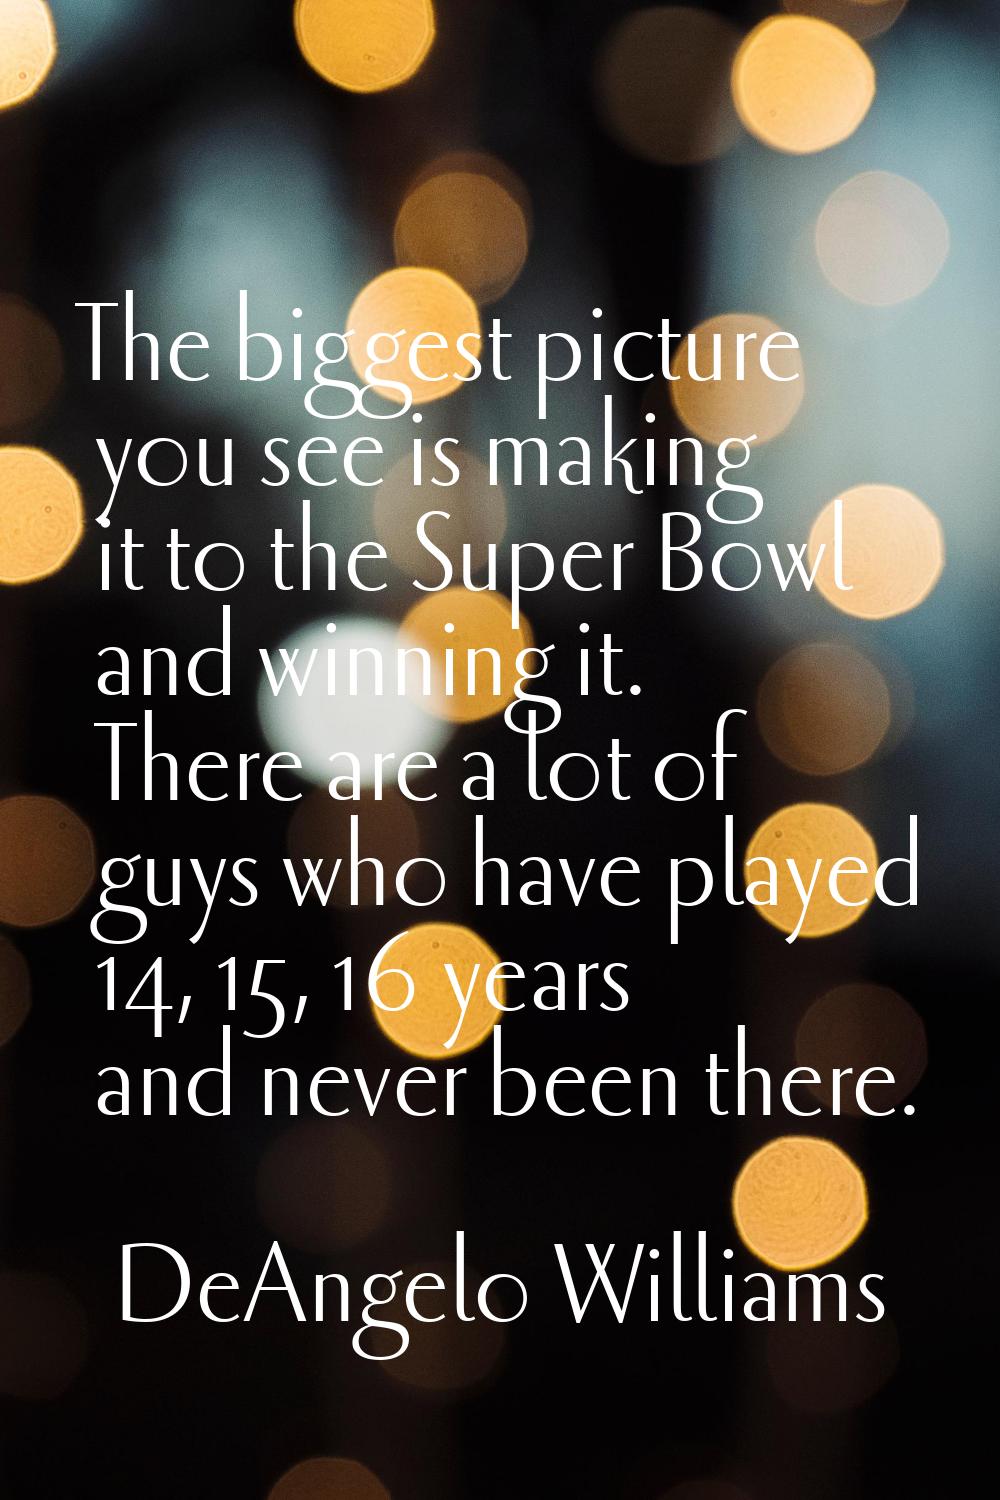 The biggest picture you see is making it to the Super Bowl and winning it. There are a lot of guys 